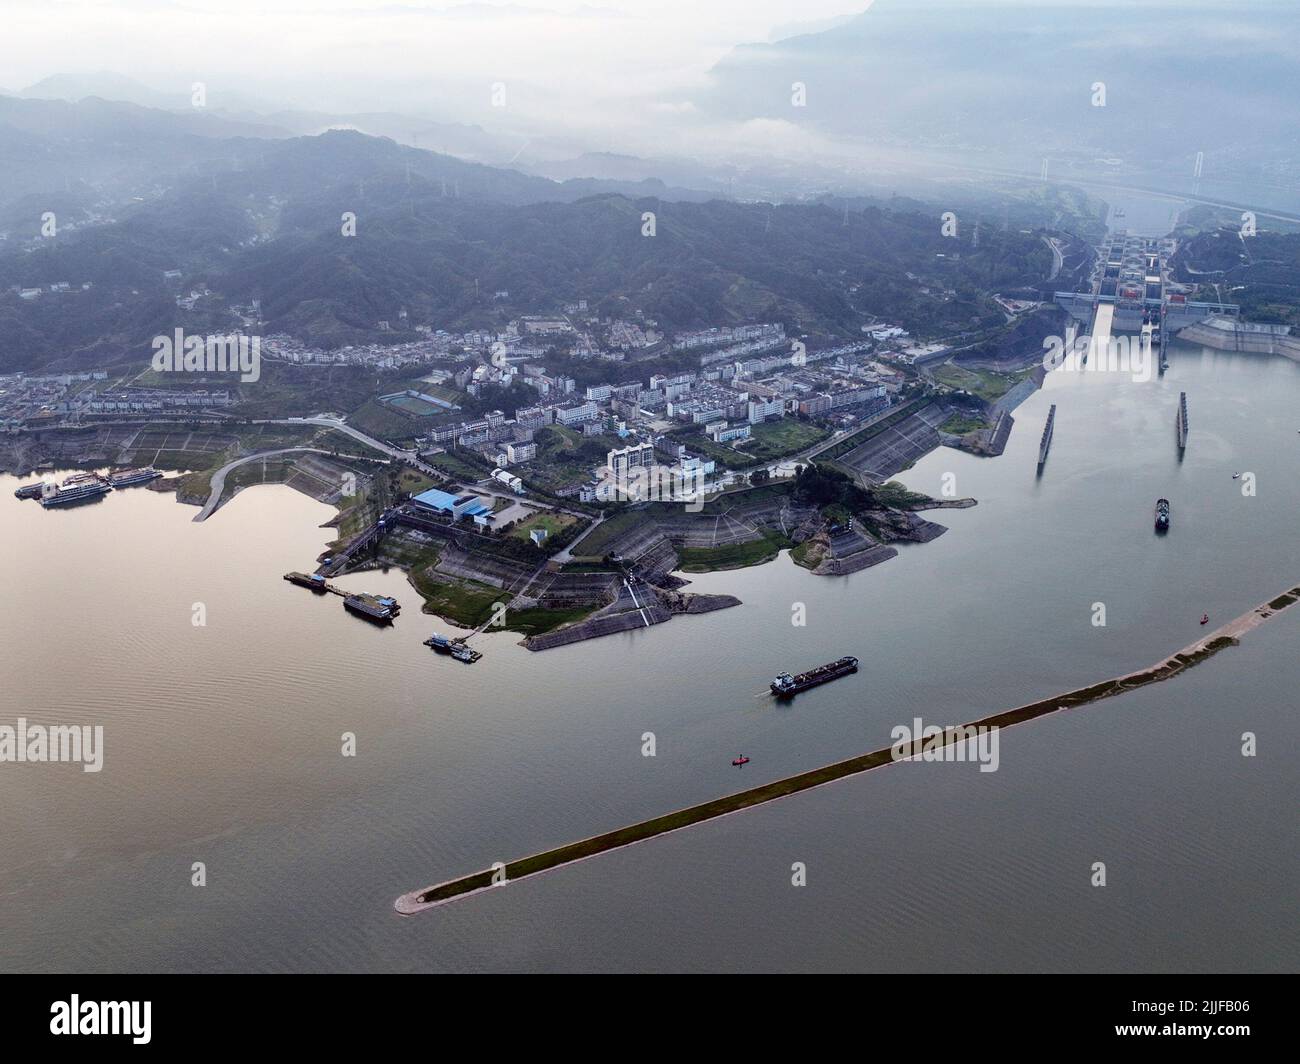 YICHANG, CHINA - JULY 25, 2022 - Aerial photo taken on July 25, 2022 shows ships passing through the five-level lock of the Three Gorges Dam in Yichan Stock Photo